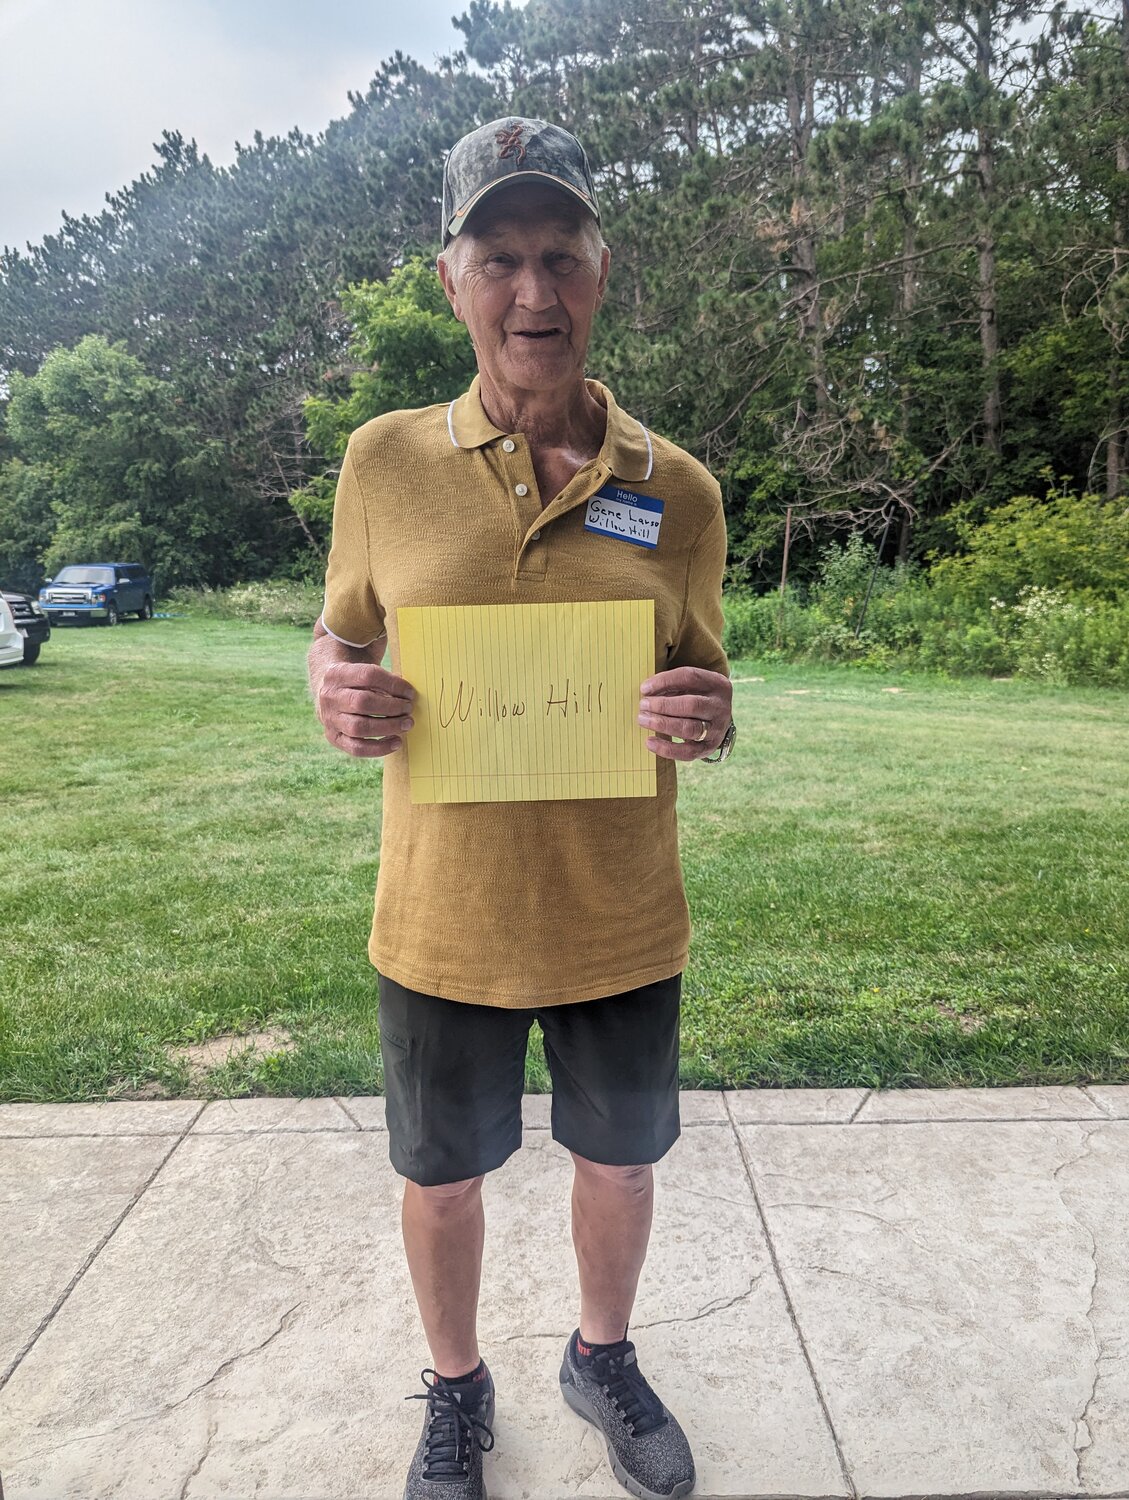 The lone reunion attendee from Willow Hill in St. Croix County was Gene Larson of River Falls.